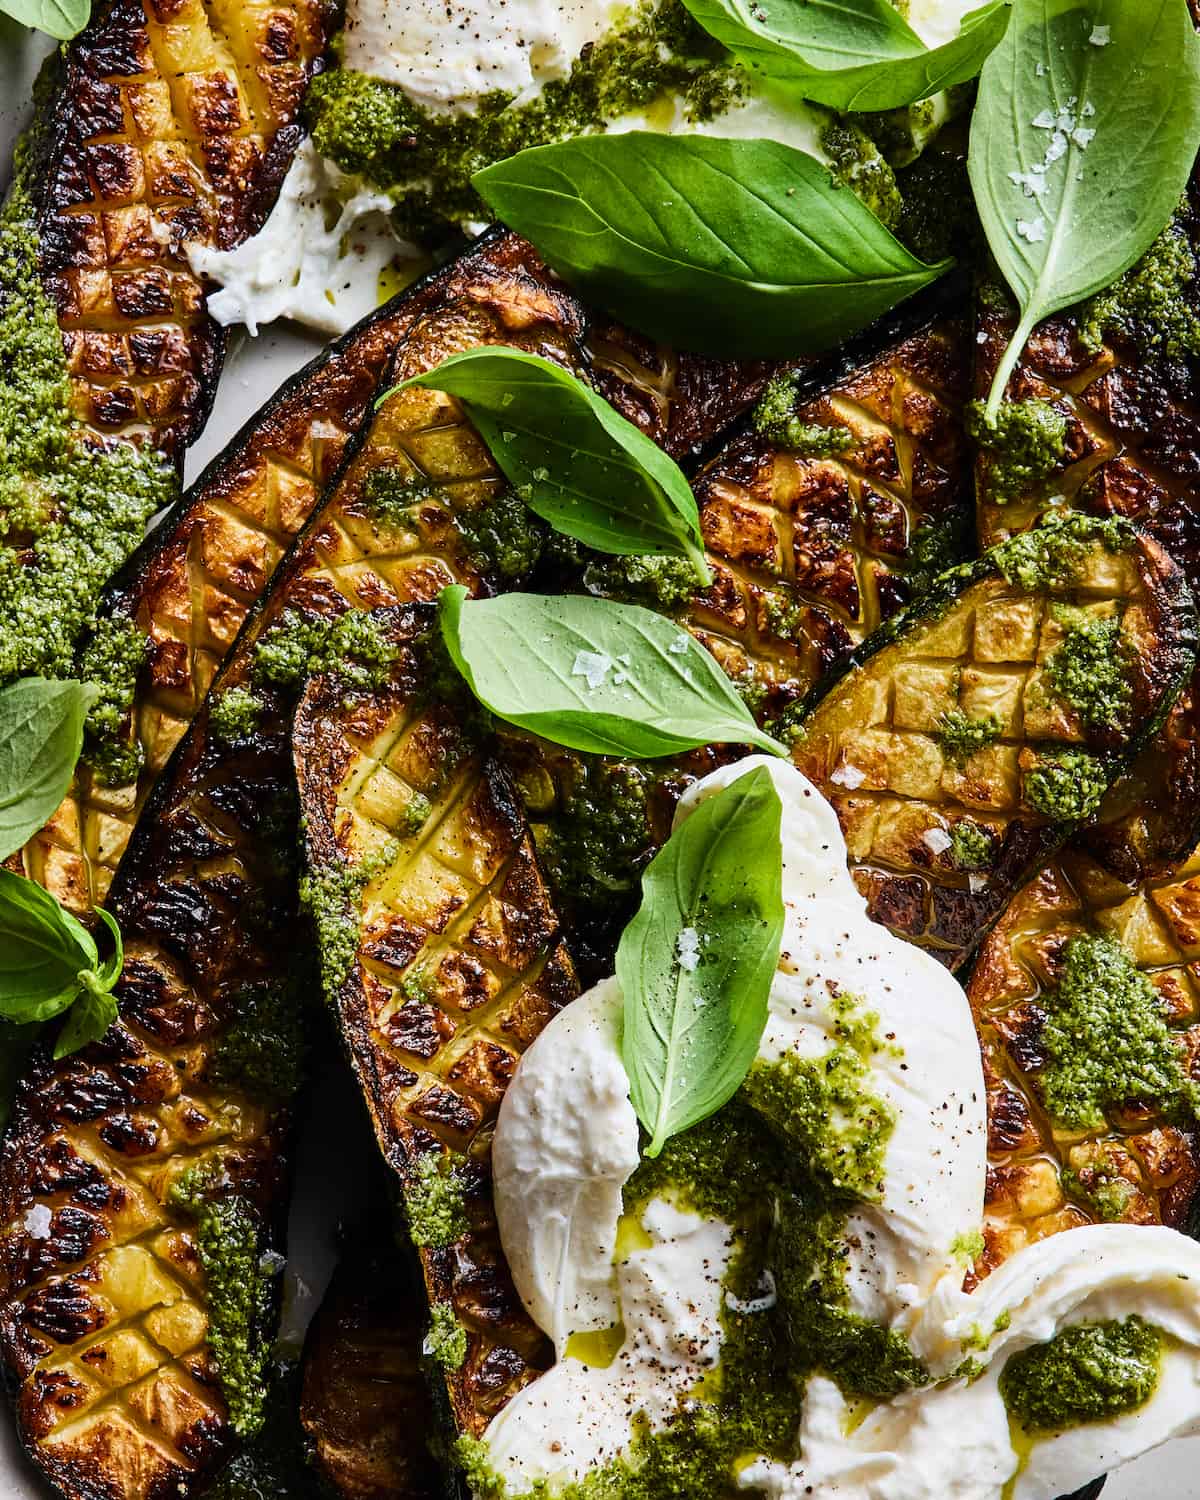 Thomas Keller's Zucchini with Burrata and Pesto close up on a platter with basil leaves